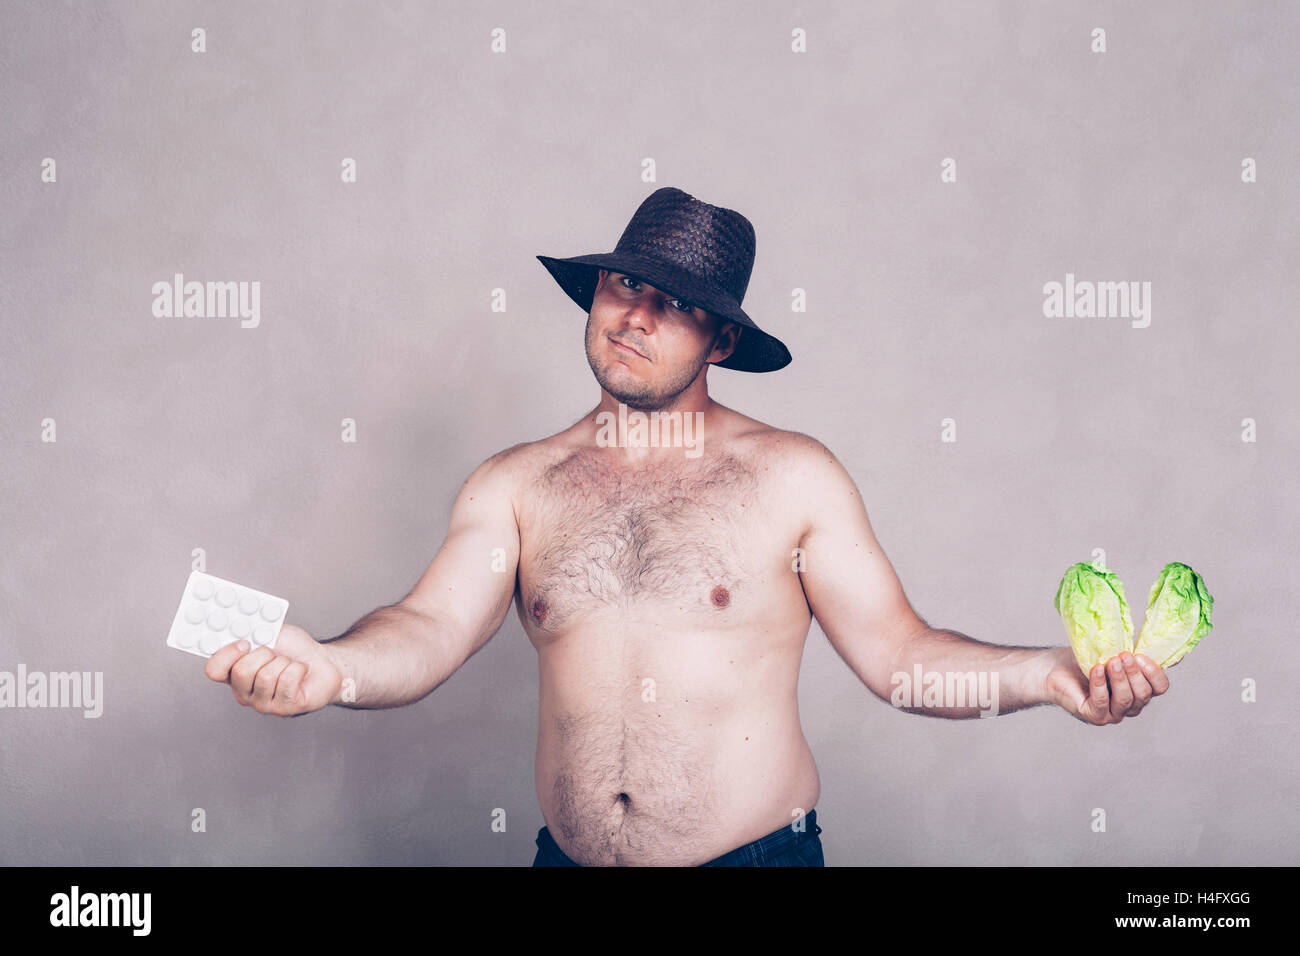 Naked corpulent man in hat giving pharmaceutical products and lettuce. Stock Photo